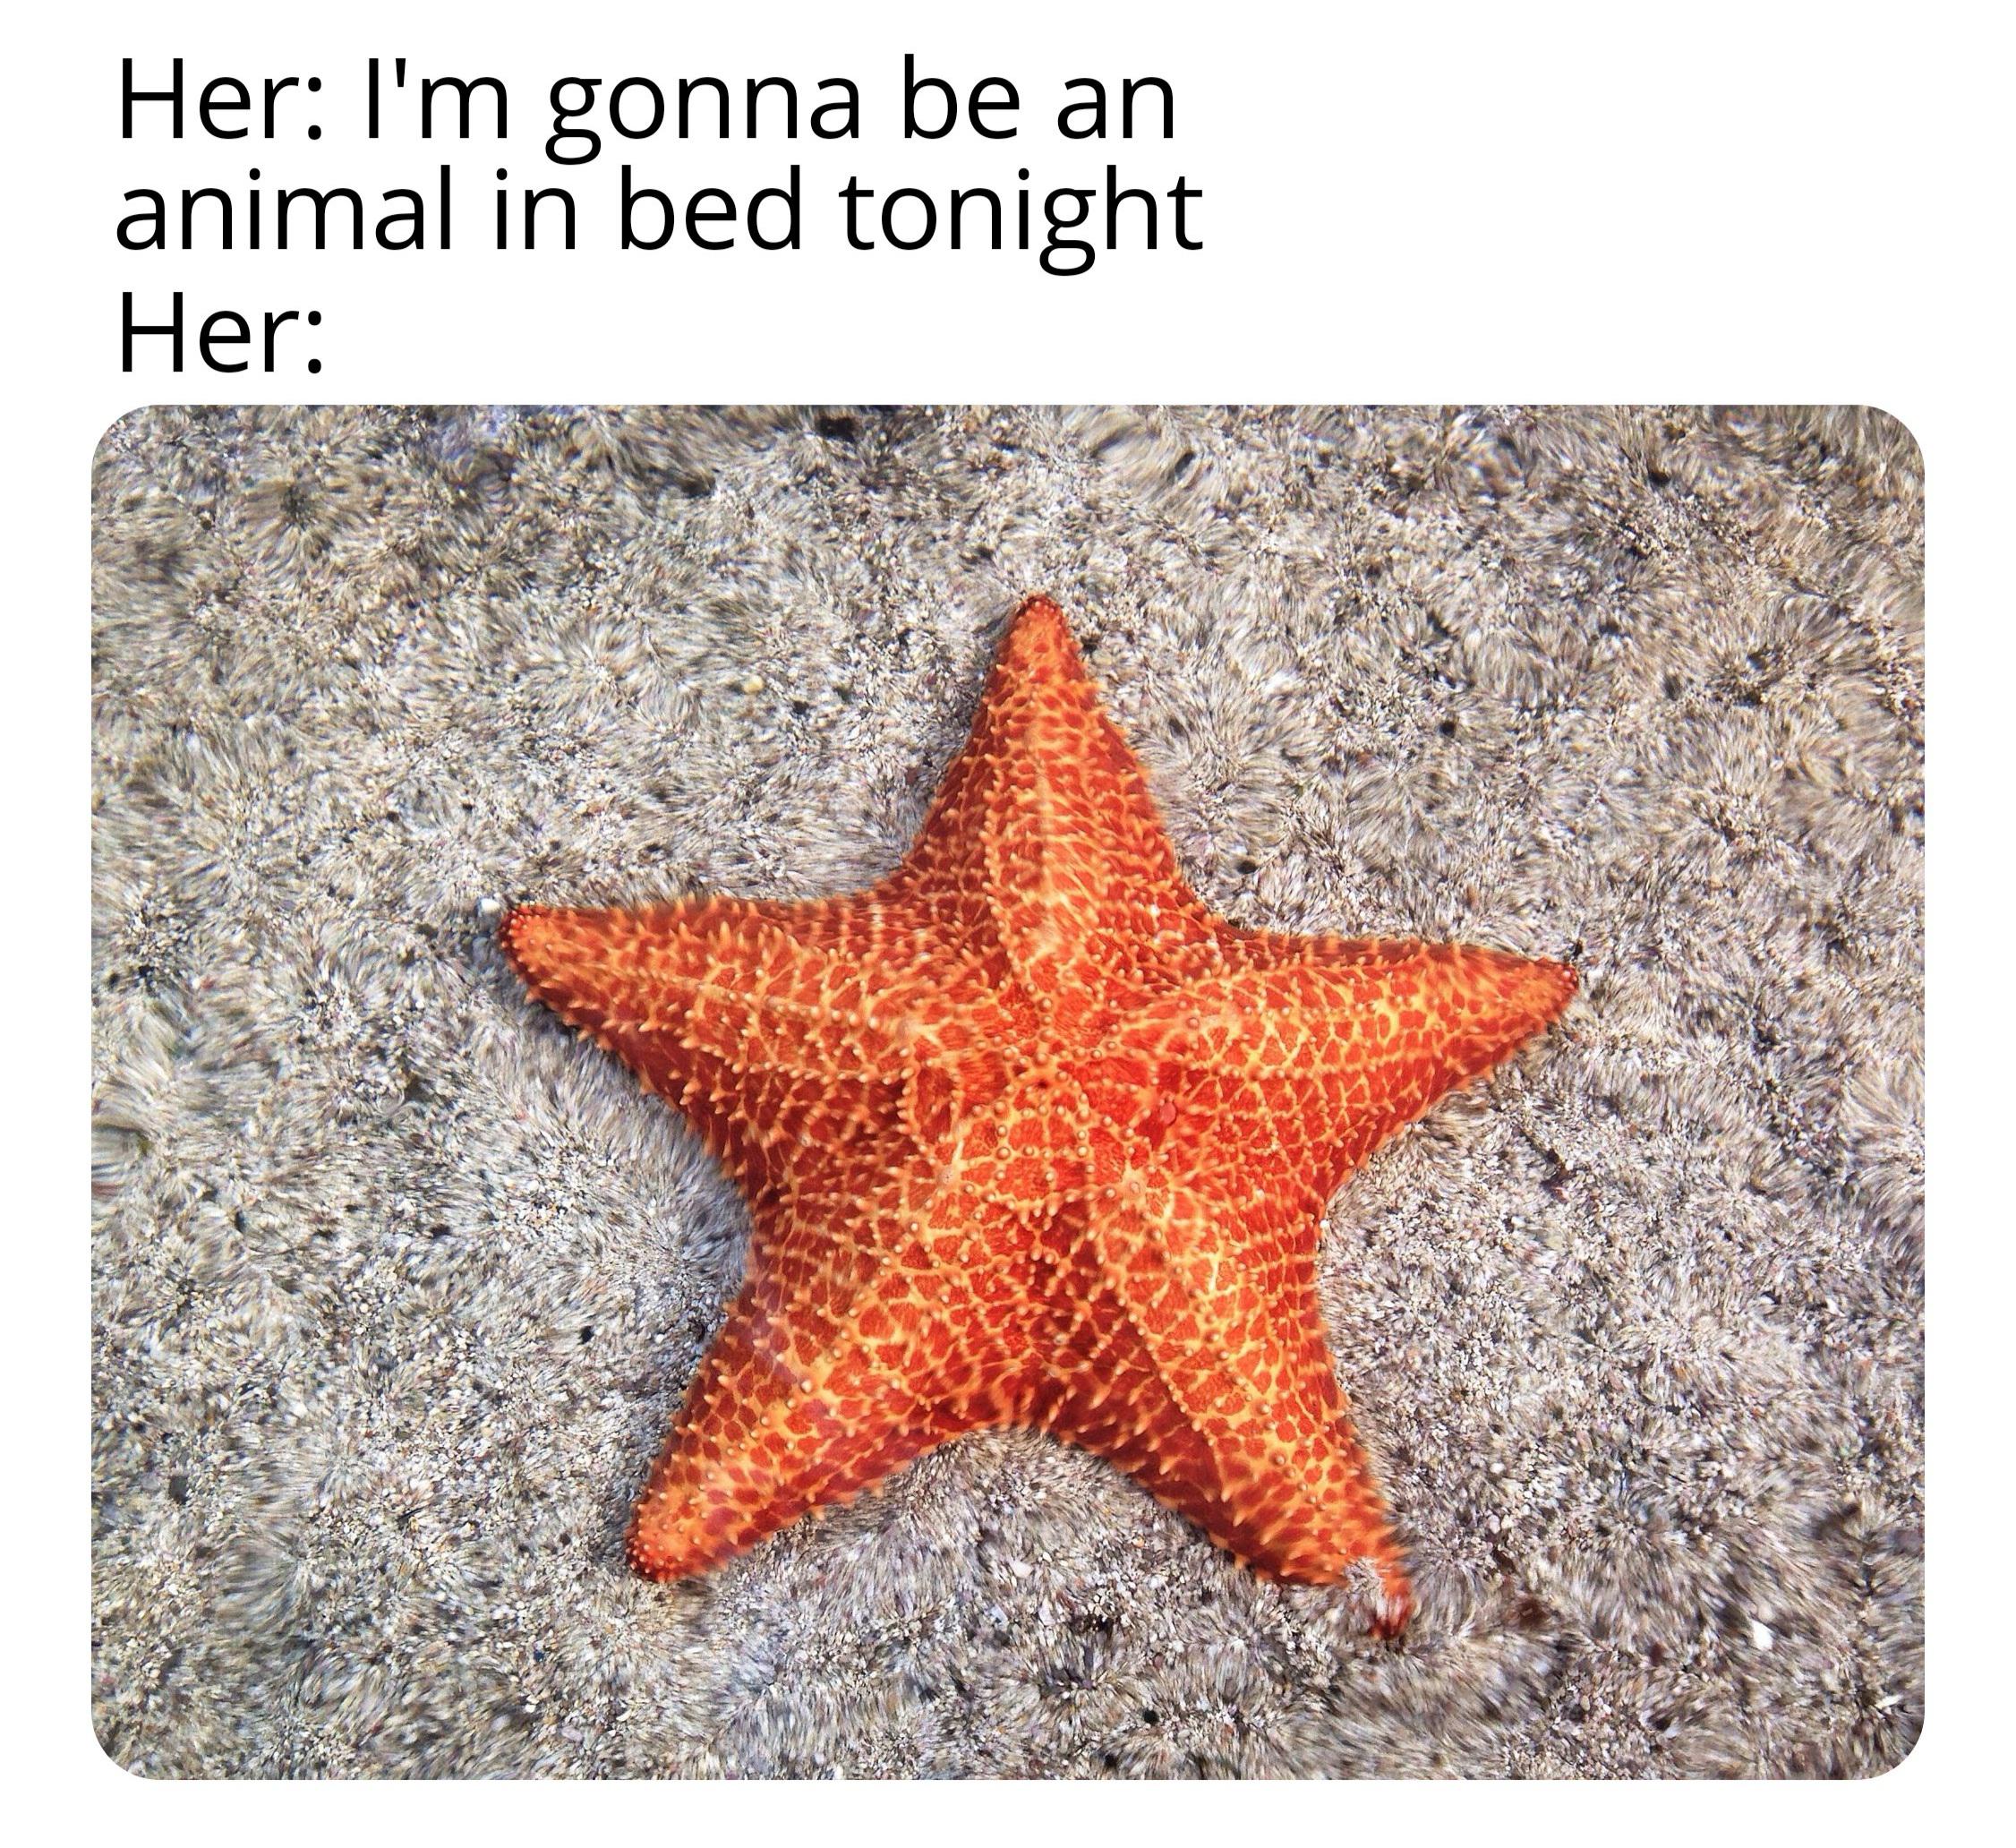 dank memes - funny memes - sea star - Her I'm gonna be an animal in bed tonight Her Bara